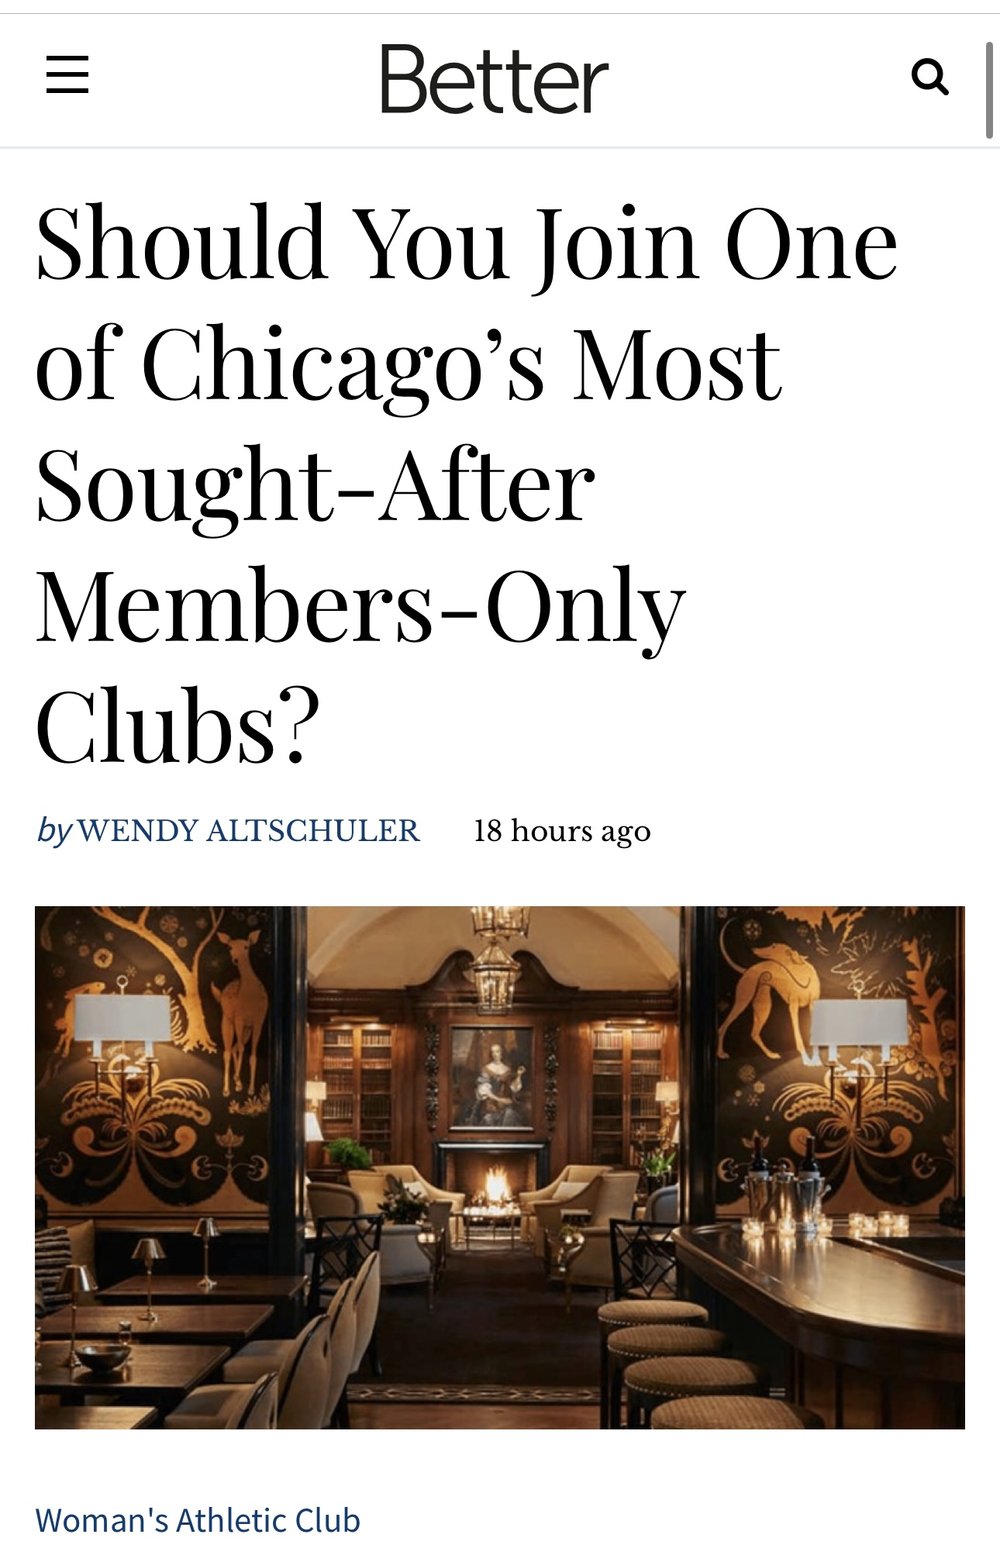 Should You Join One of Chicago’s Most Sought-After Members-Only Clubs?